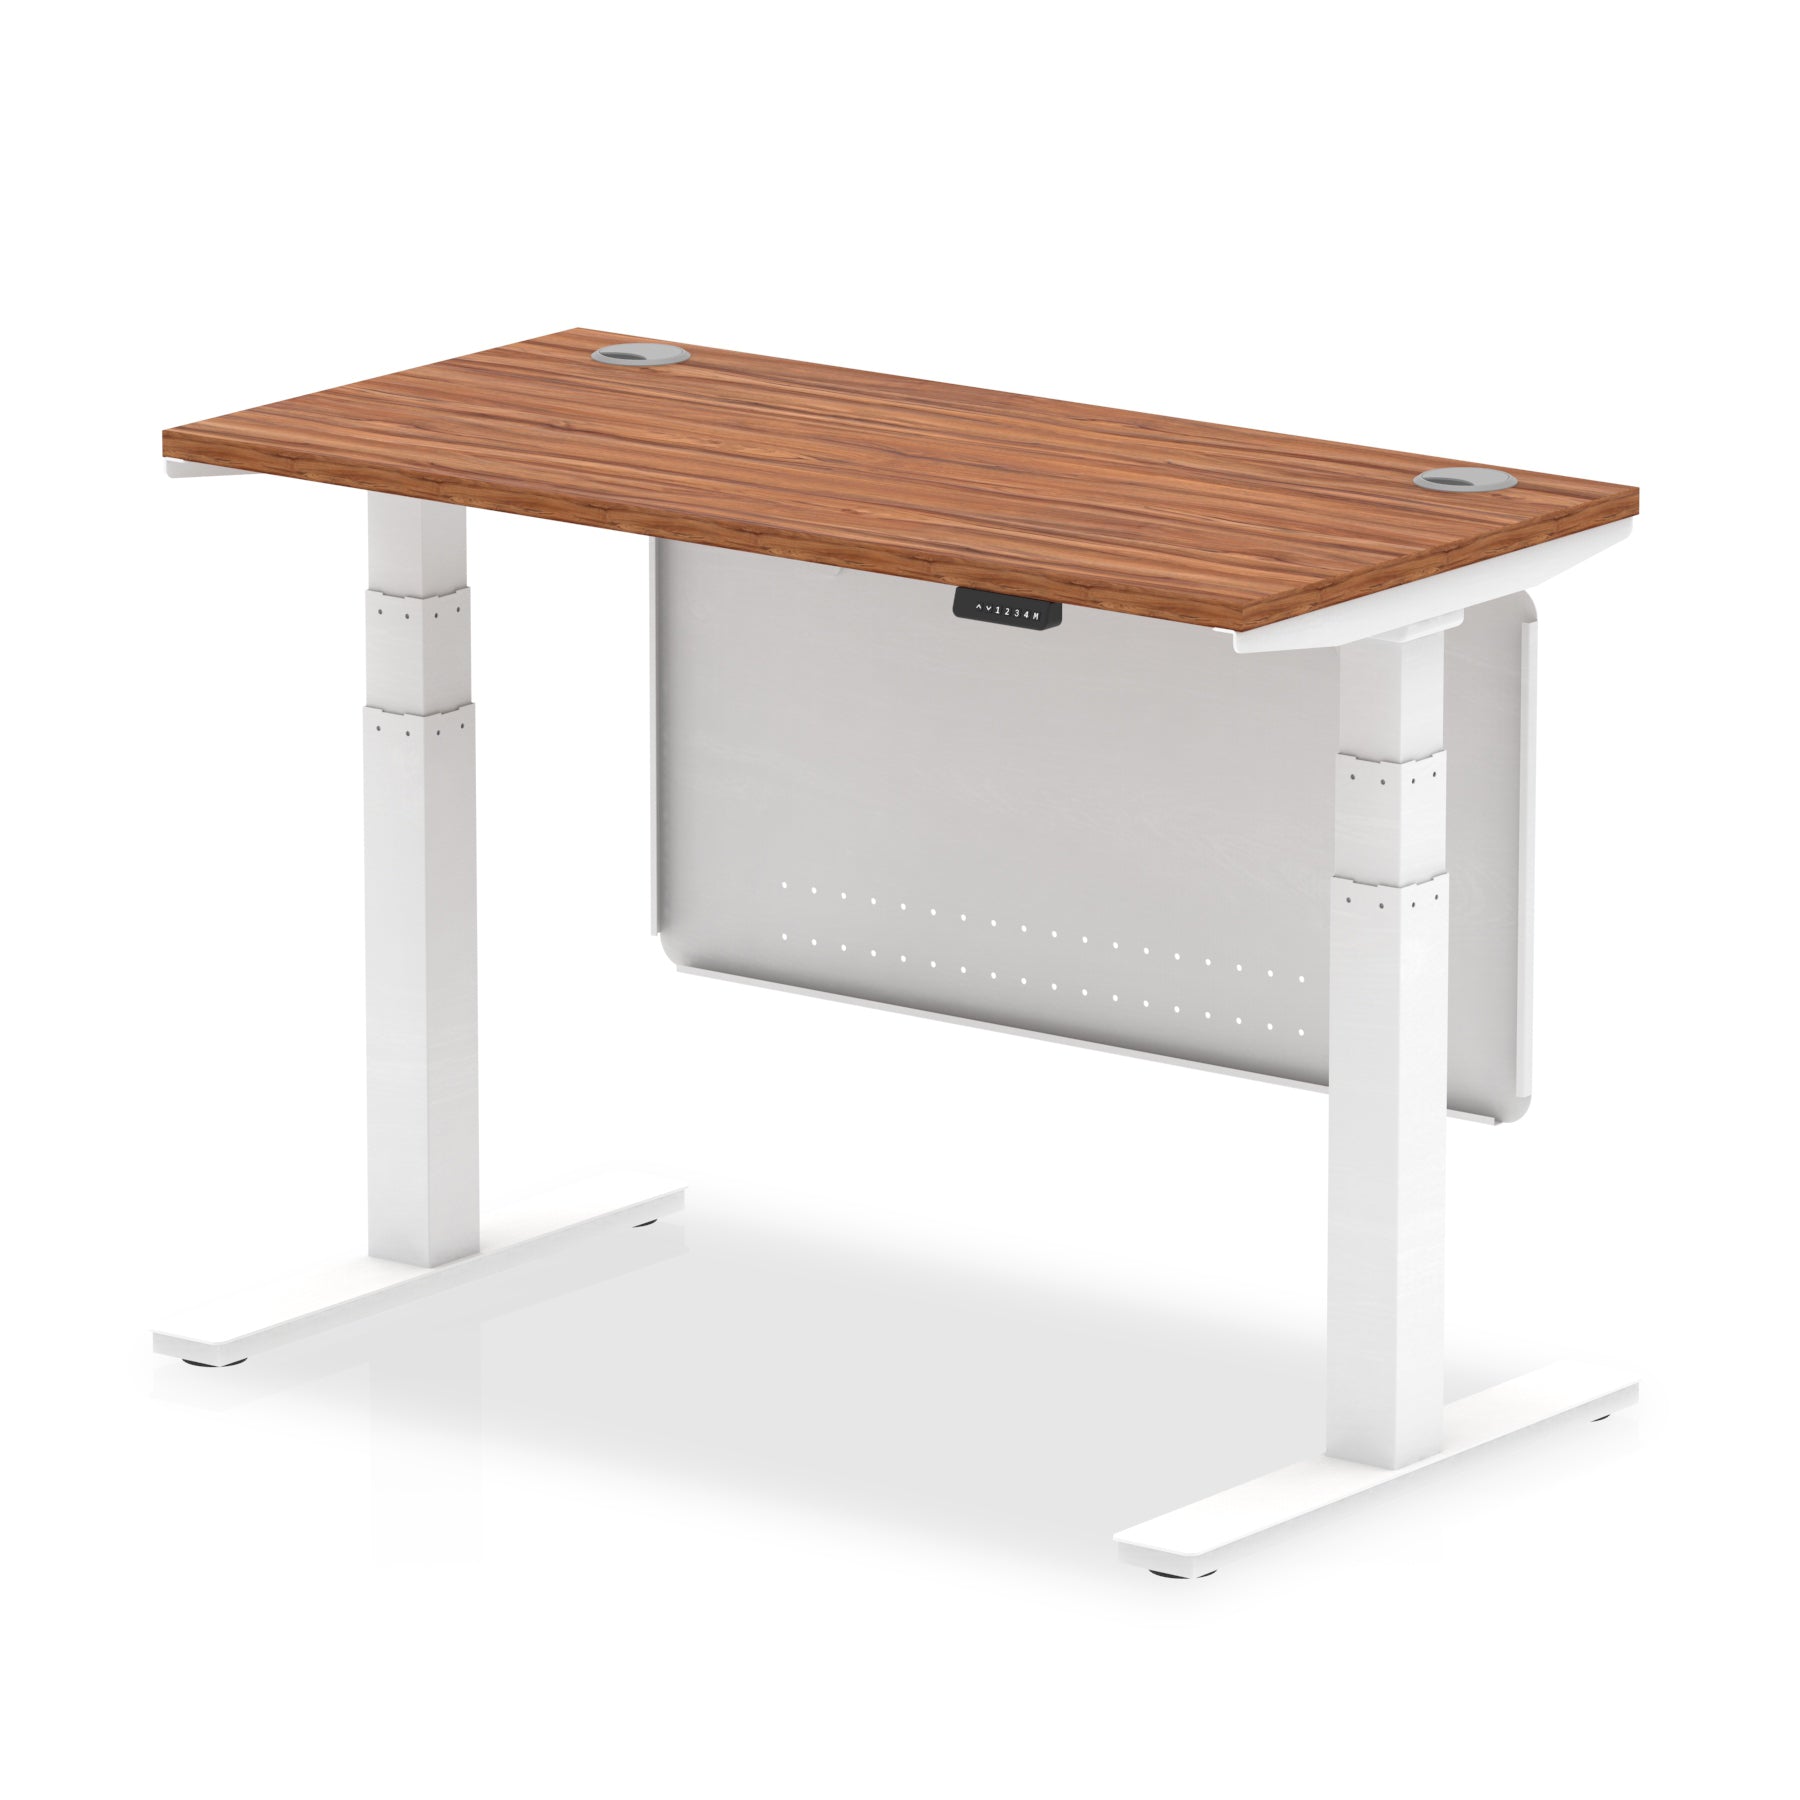 Air Height Adjustable Slimline Desk With Cable Ports With Steel Modesty Panel